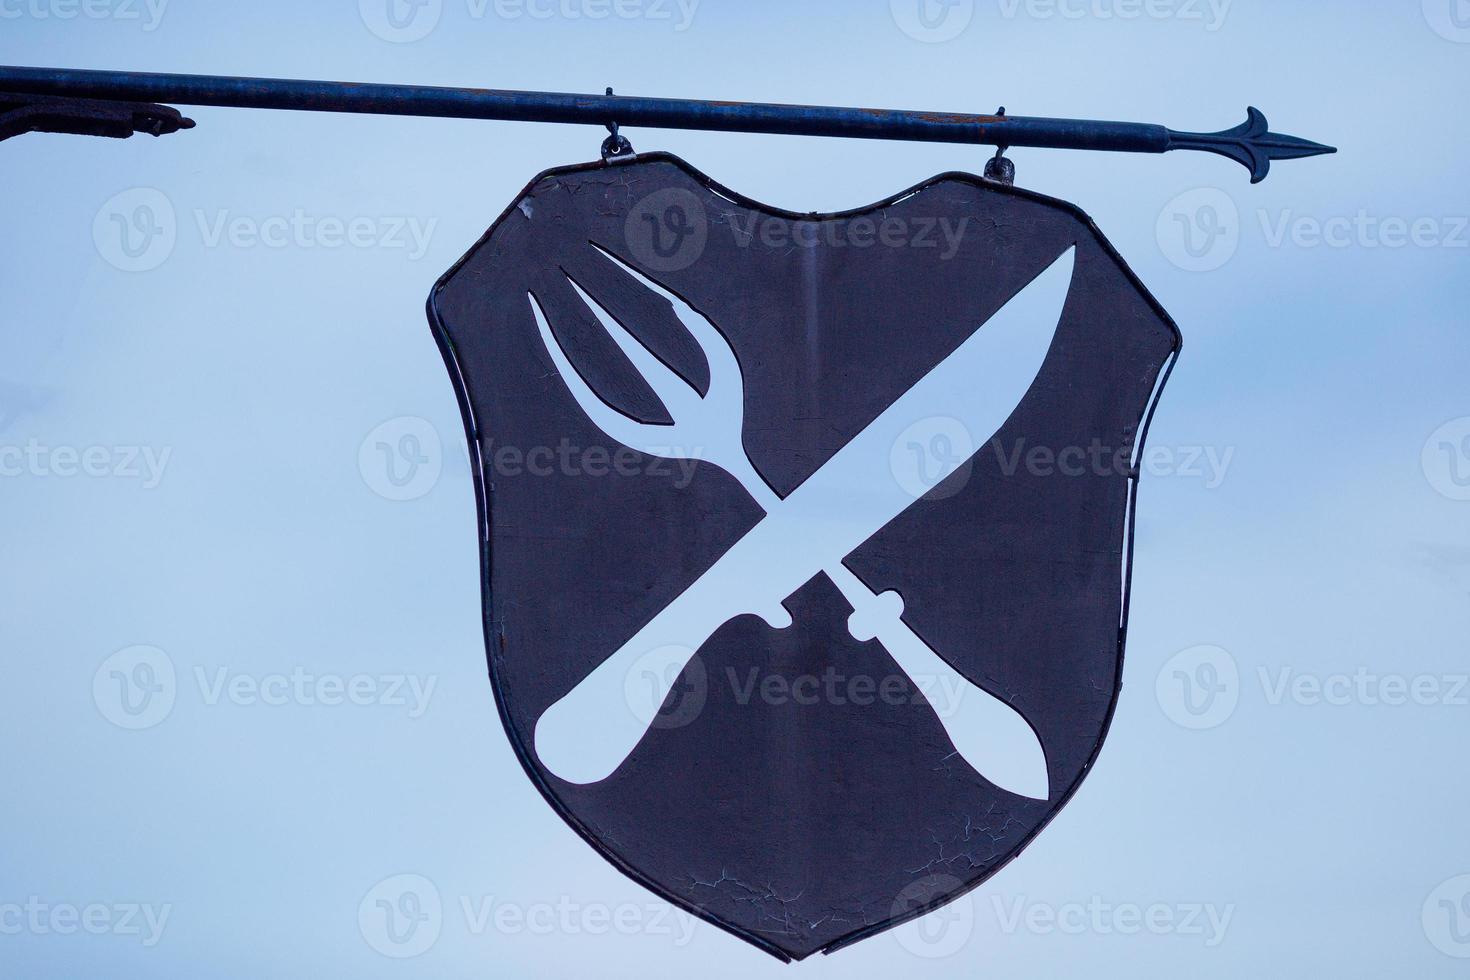 the iron sign of the cafe knife and fork crossed against the gloomy sky photo